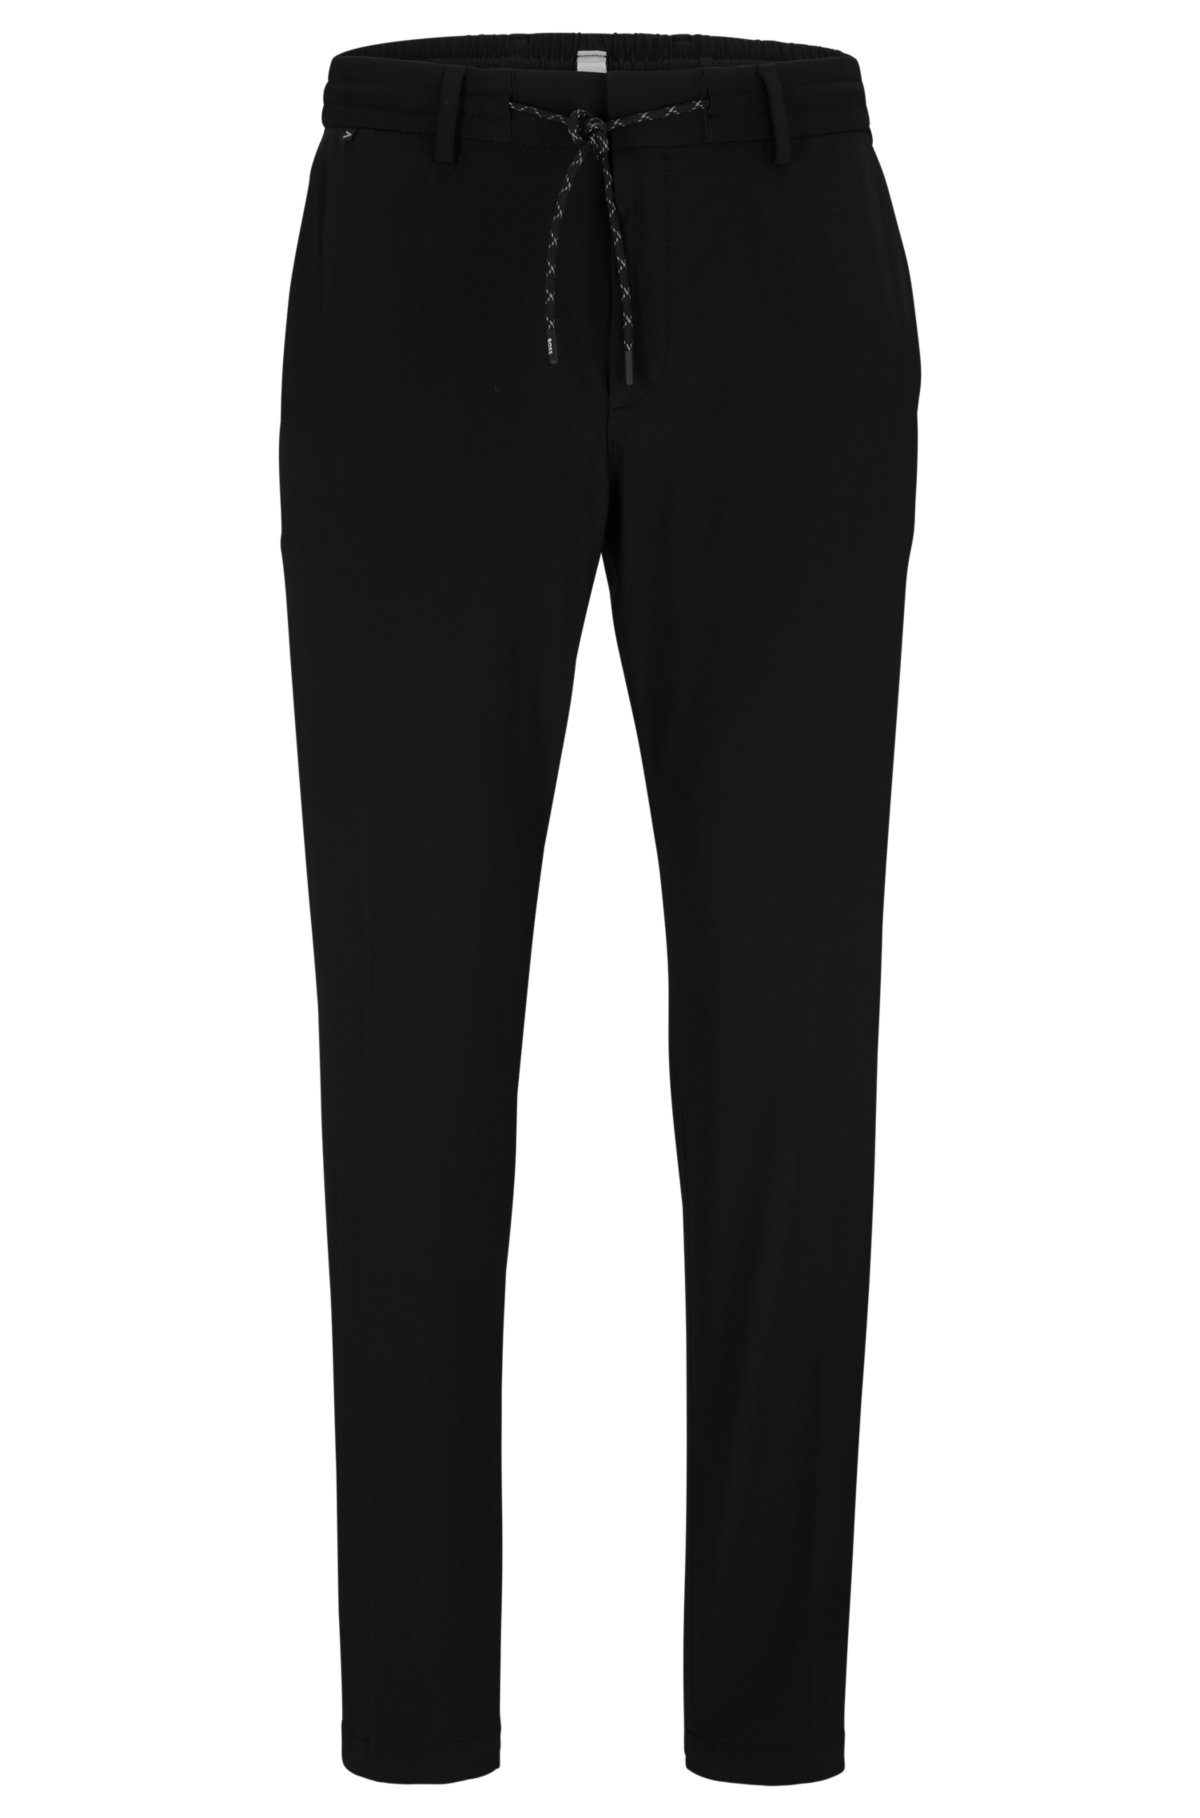 performance-stretch - BOSS in Slim-fit jersey trousers